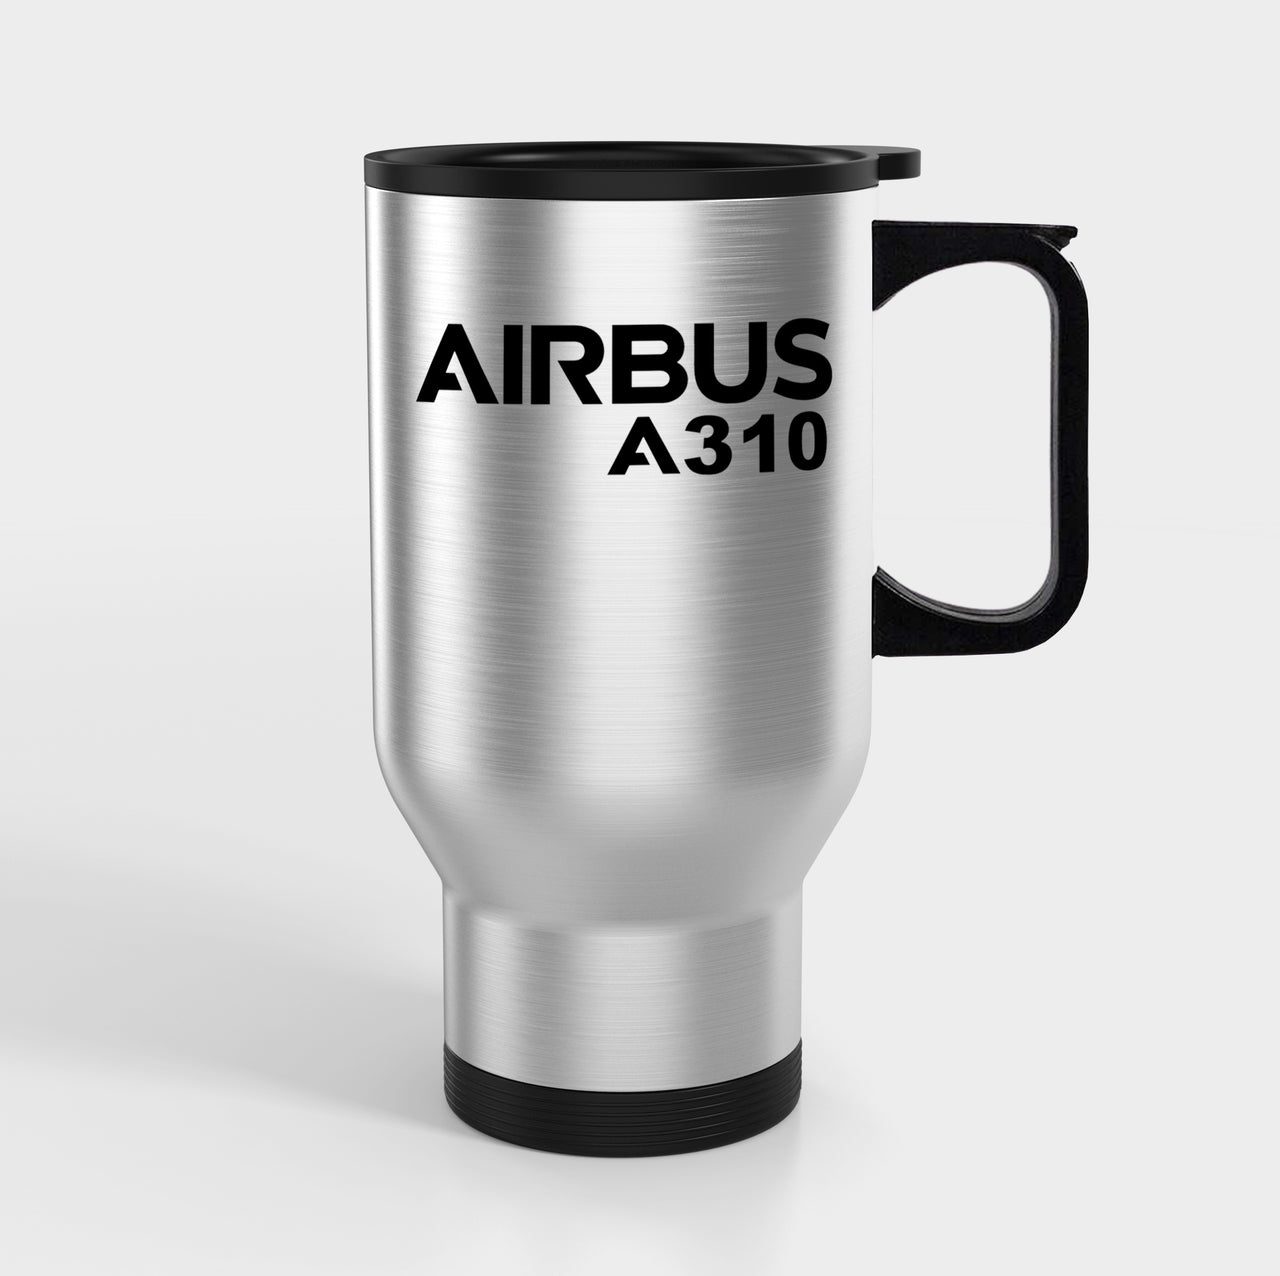 Airbus A310 & Text Designed Travel Mugs (With Holder)